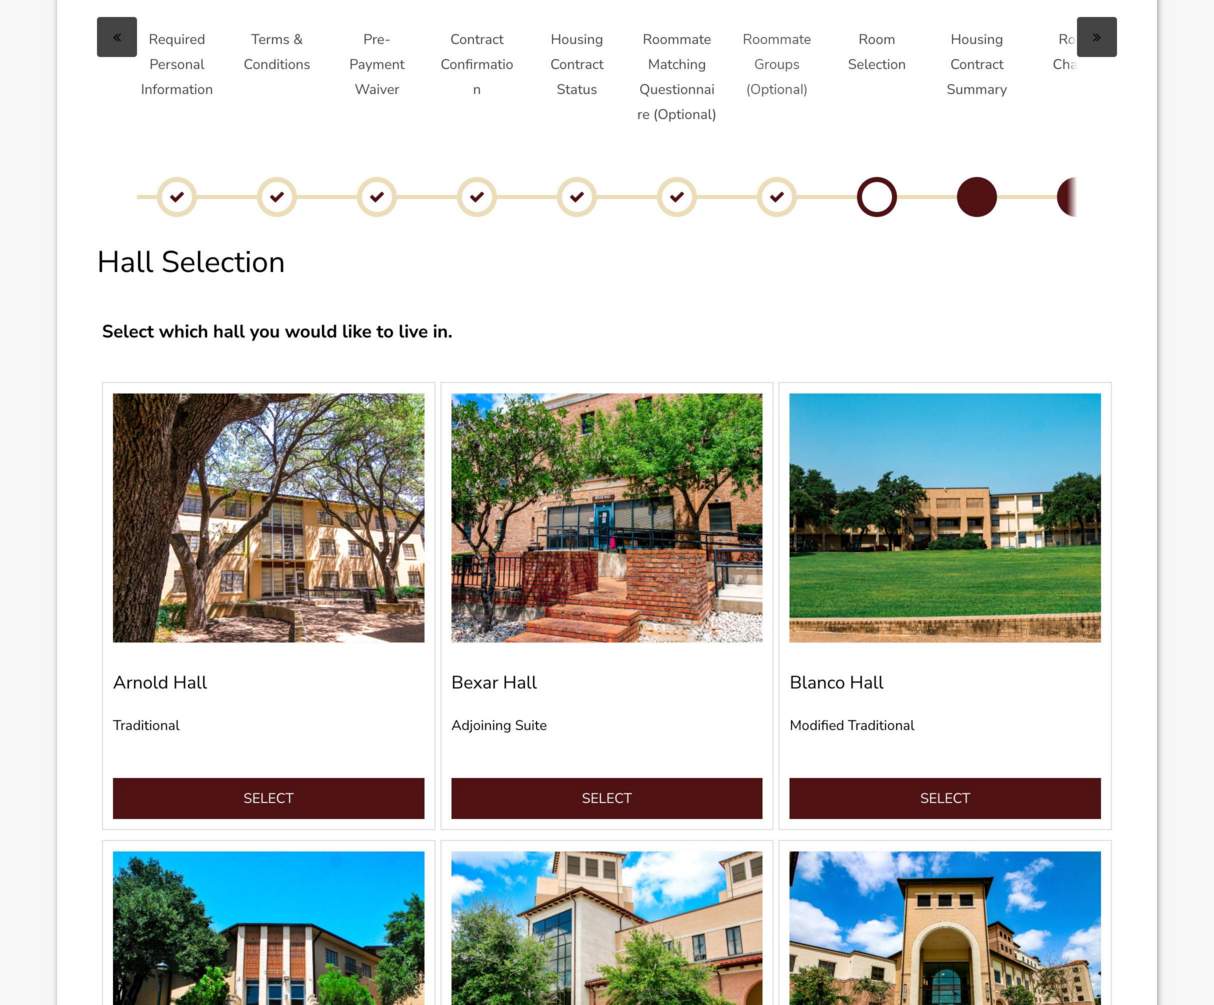 Screenshot of Hall Selection page in the Housing Portal.